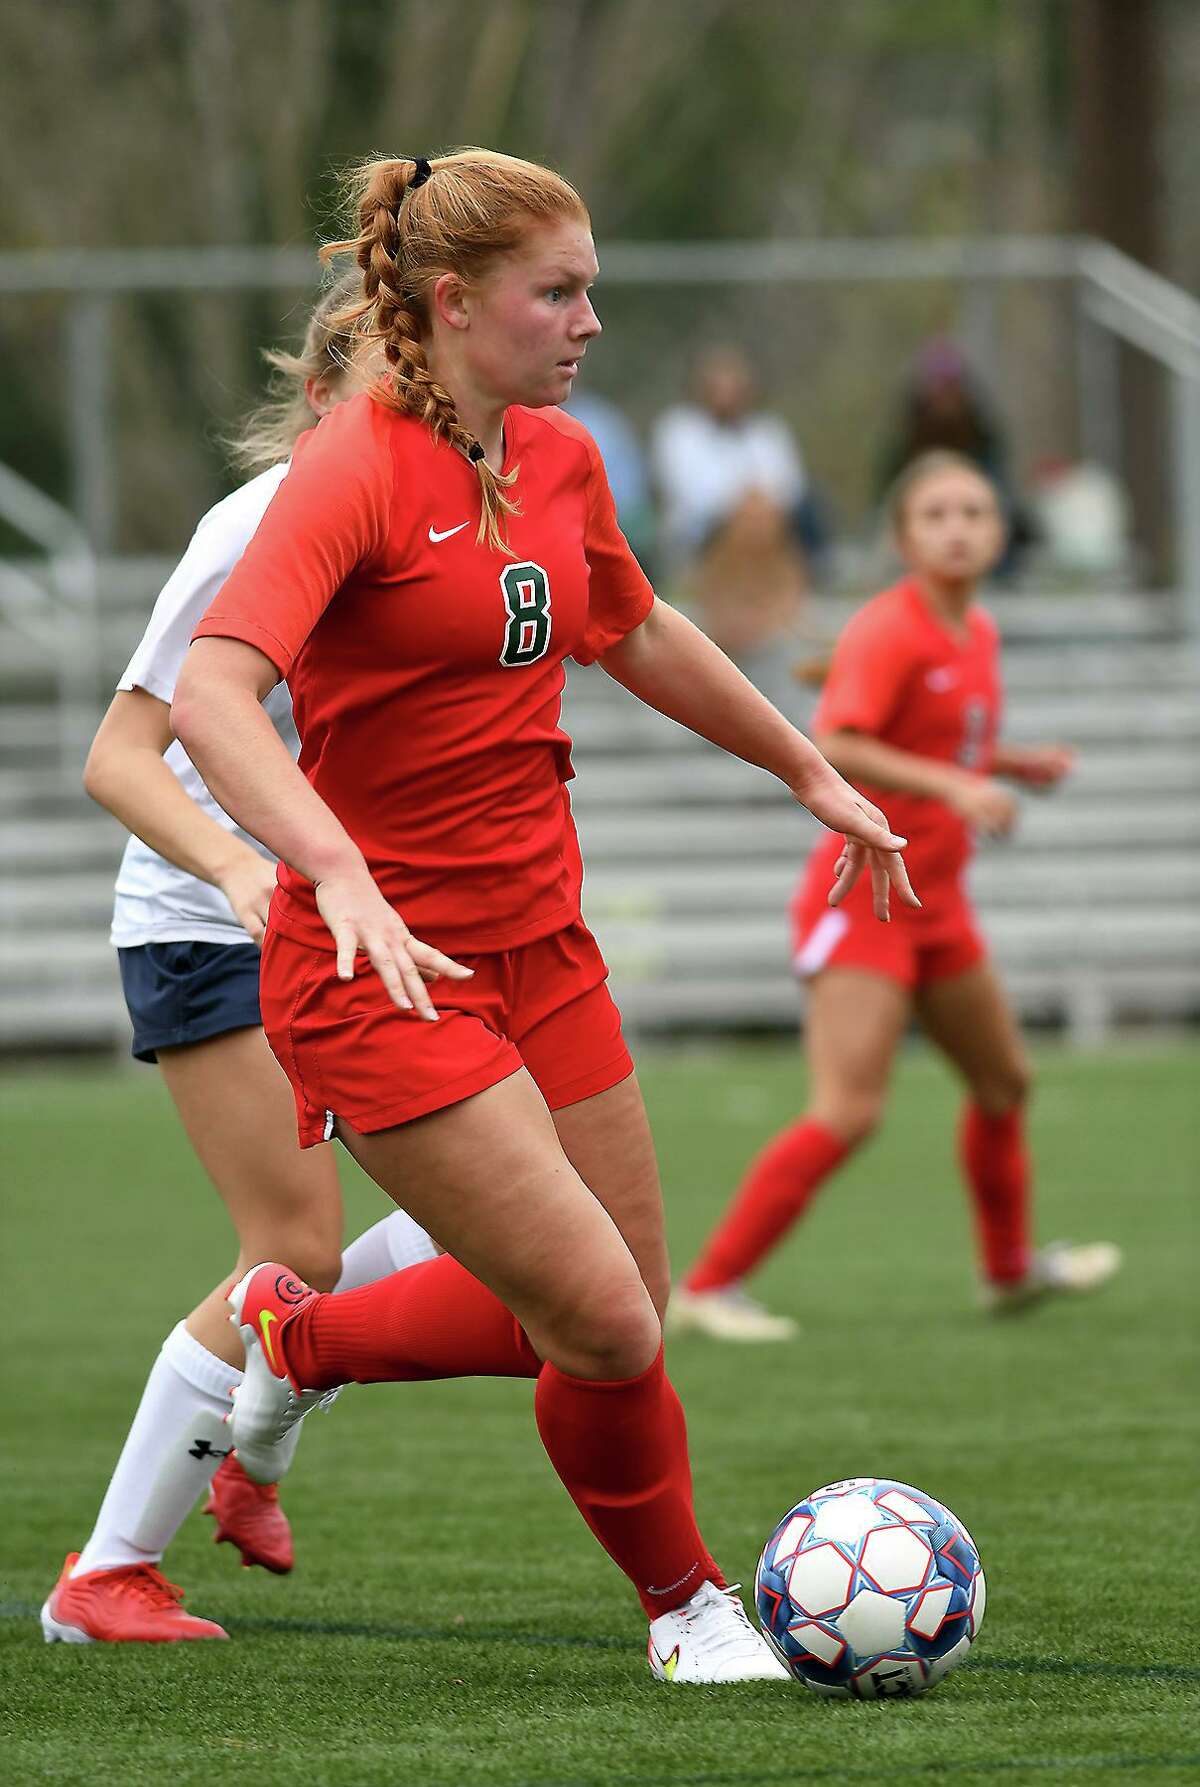 The Woodland's Ellen Persson works the ball upfield against Tomball Memorial during their first round matchup in the Lady Highlander Invitational: The War in the Woods played at the Gosling Sports Complex in The Woodlands on Jan. 6, 2022.